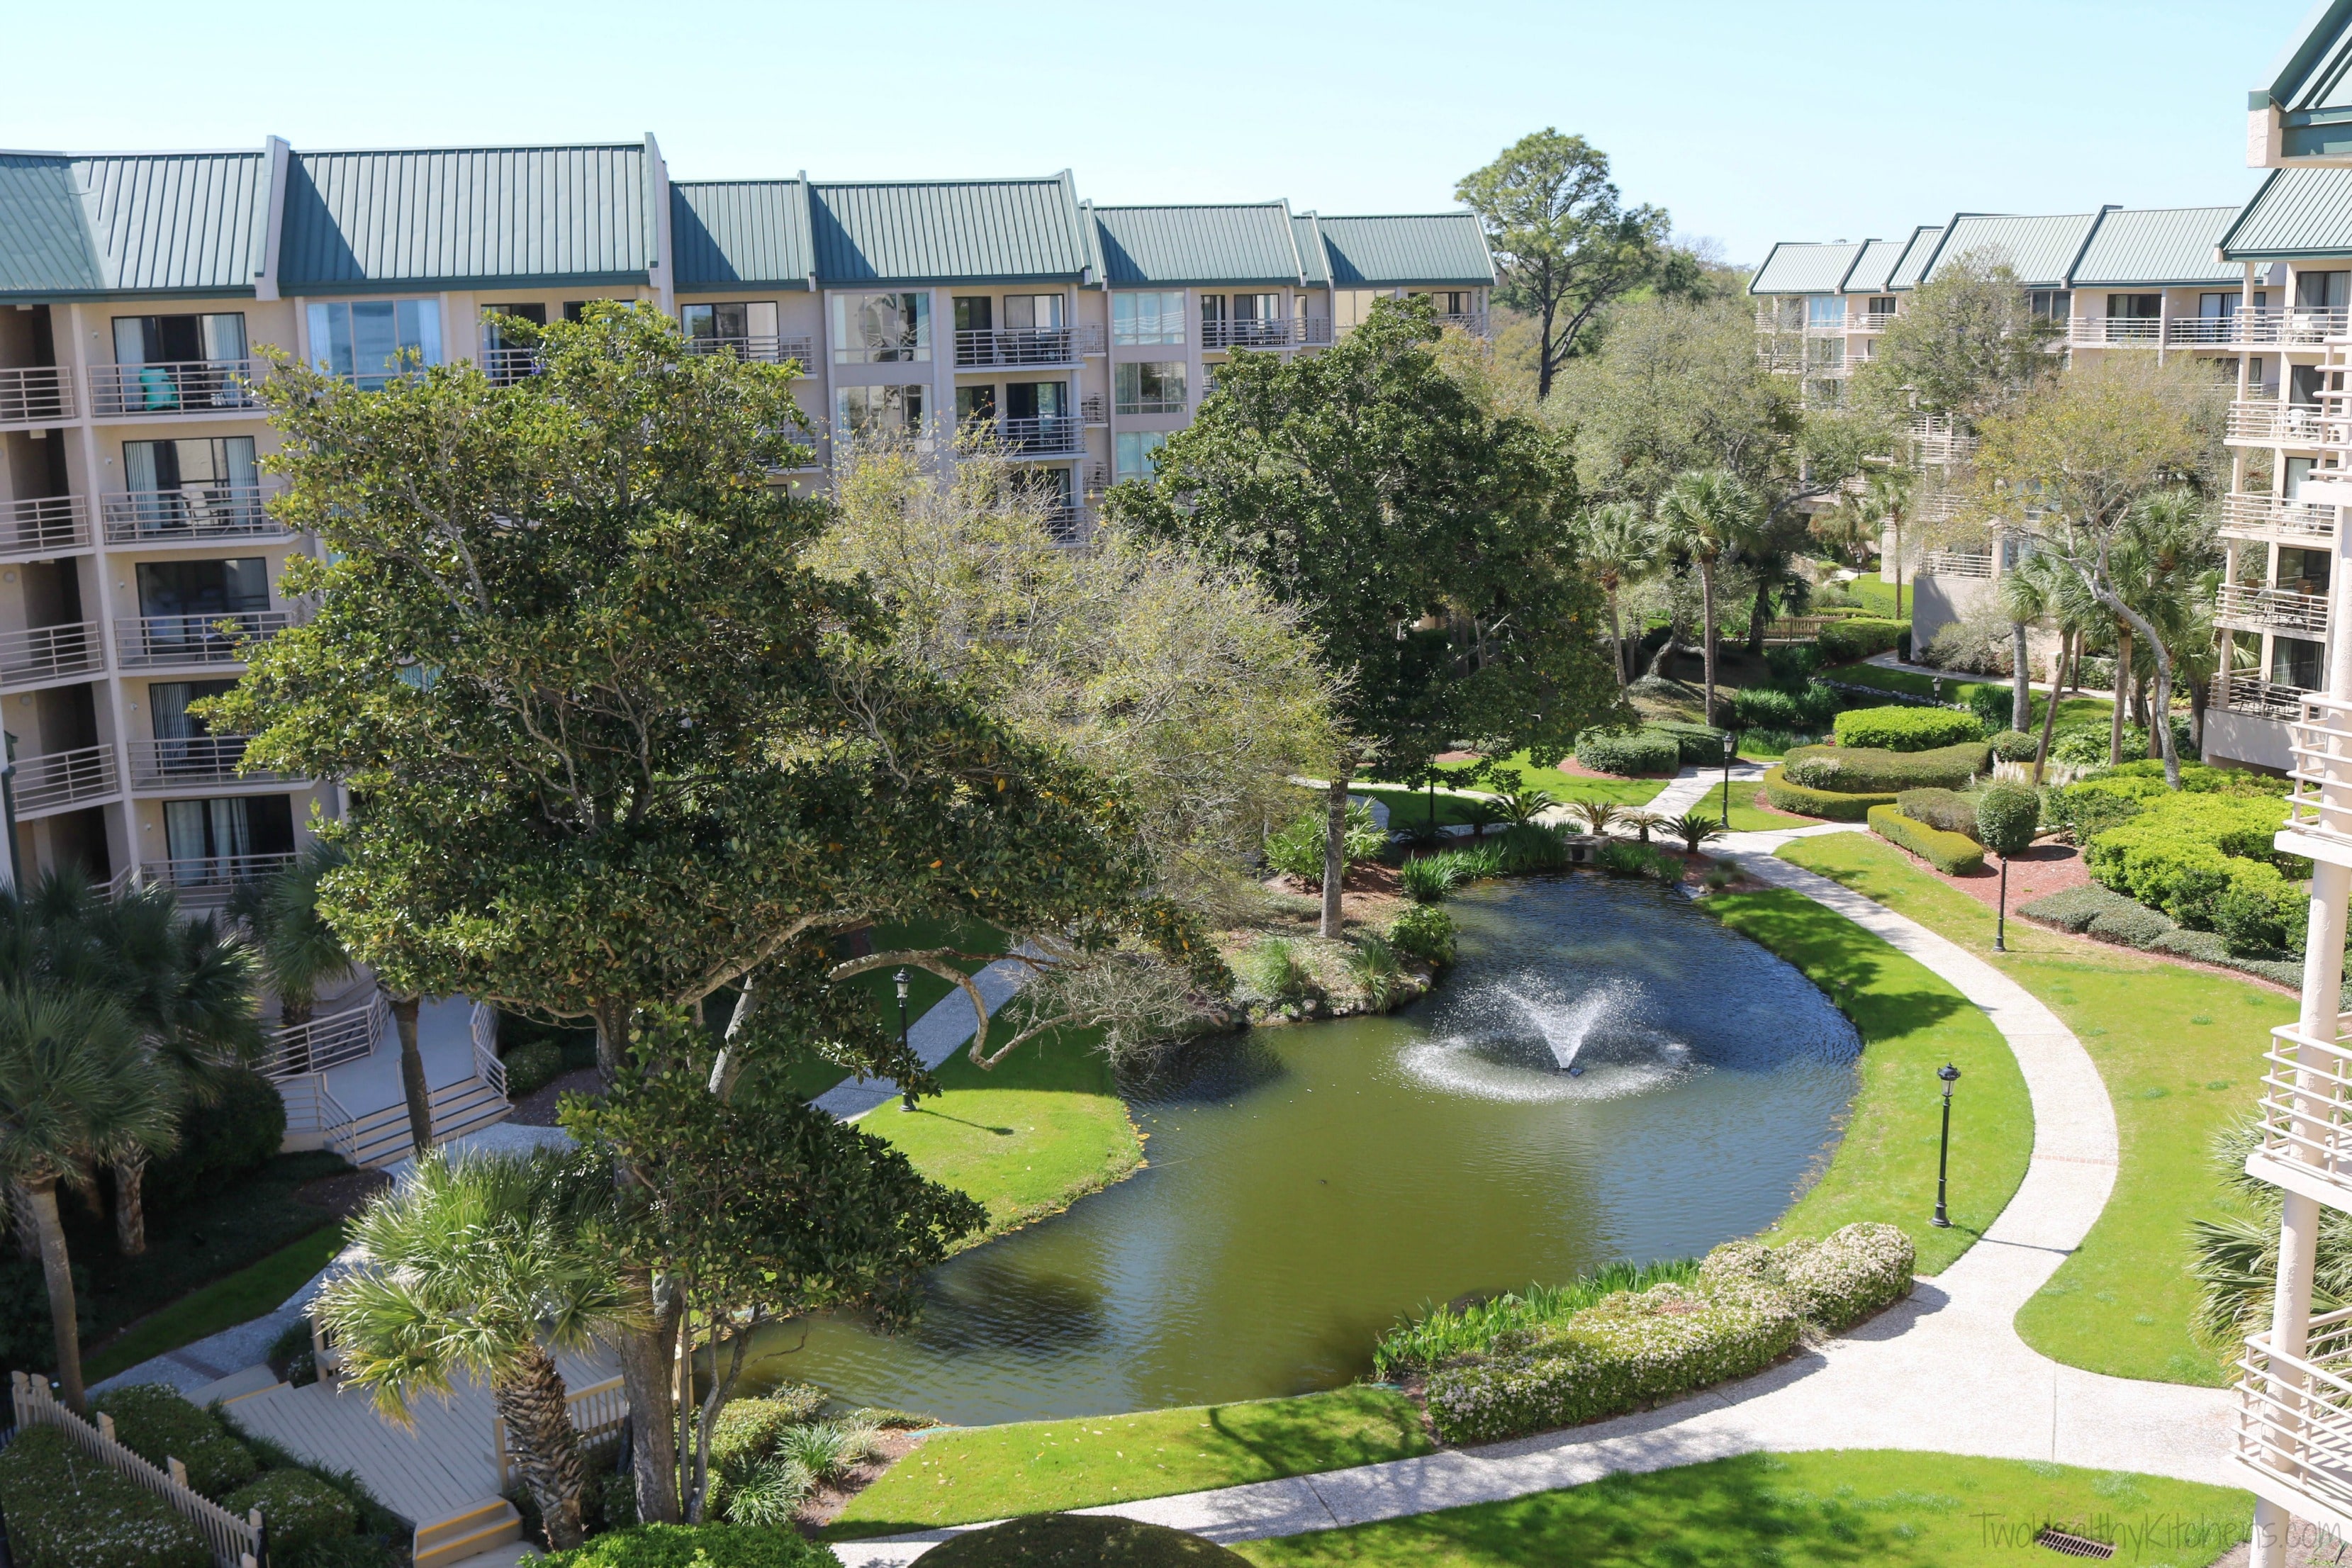 Pond, trees and walkways of interior courtyard at Villamare condos in Hilton Head.